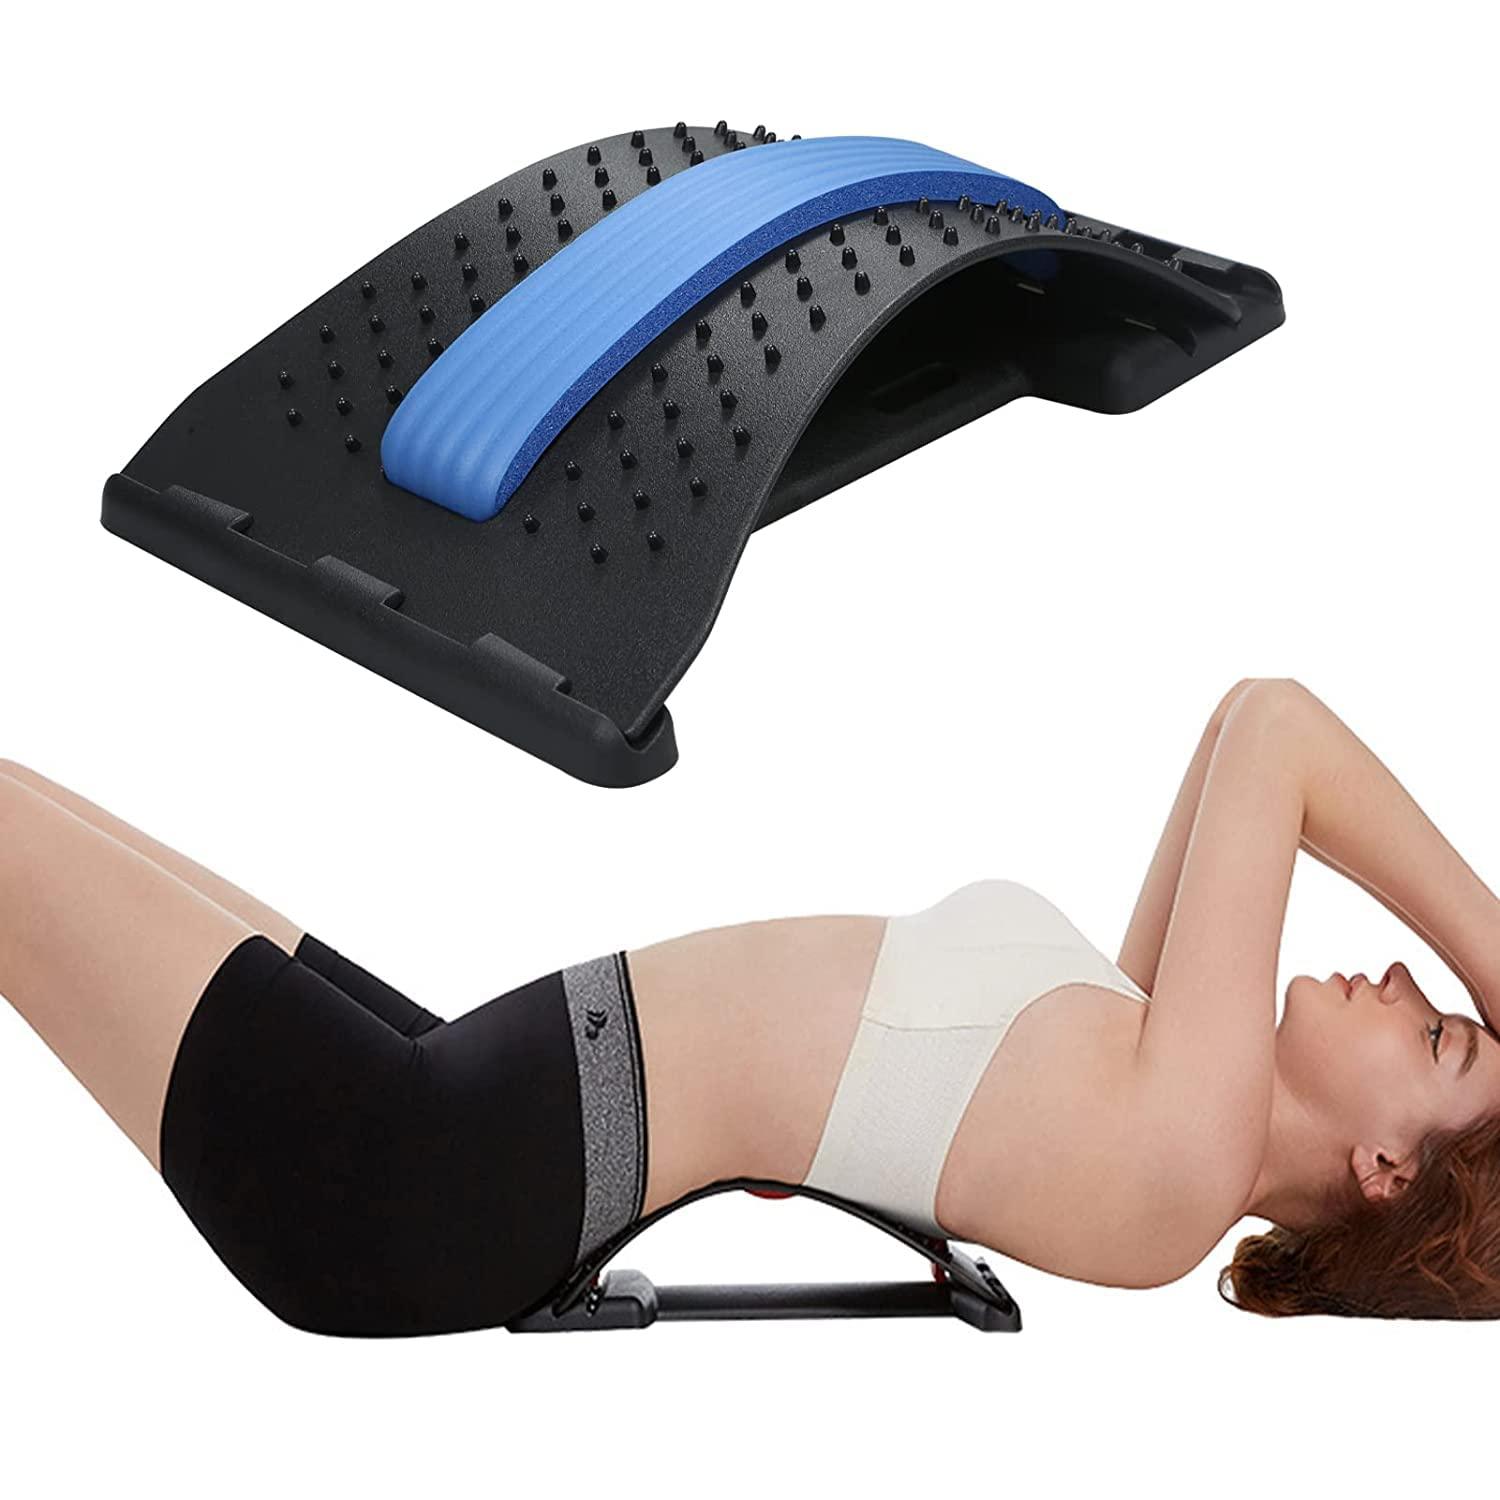 Back Stretcher for Spinal Pain Relief, Back Pain Relief Product